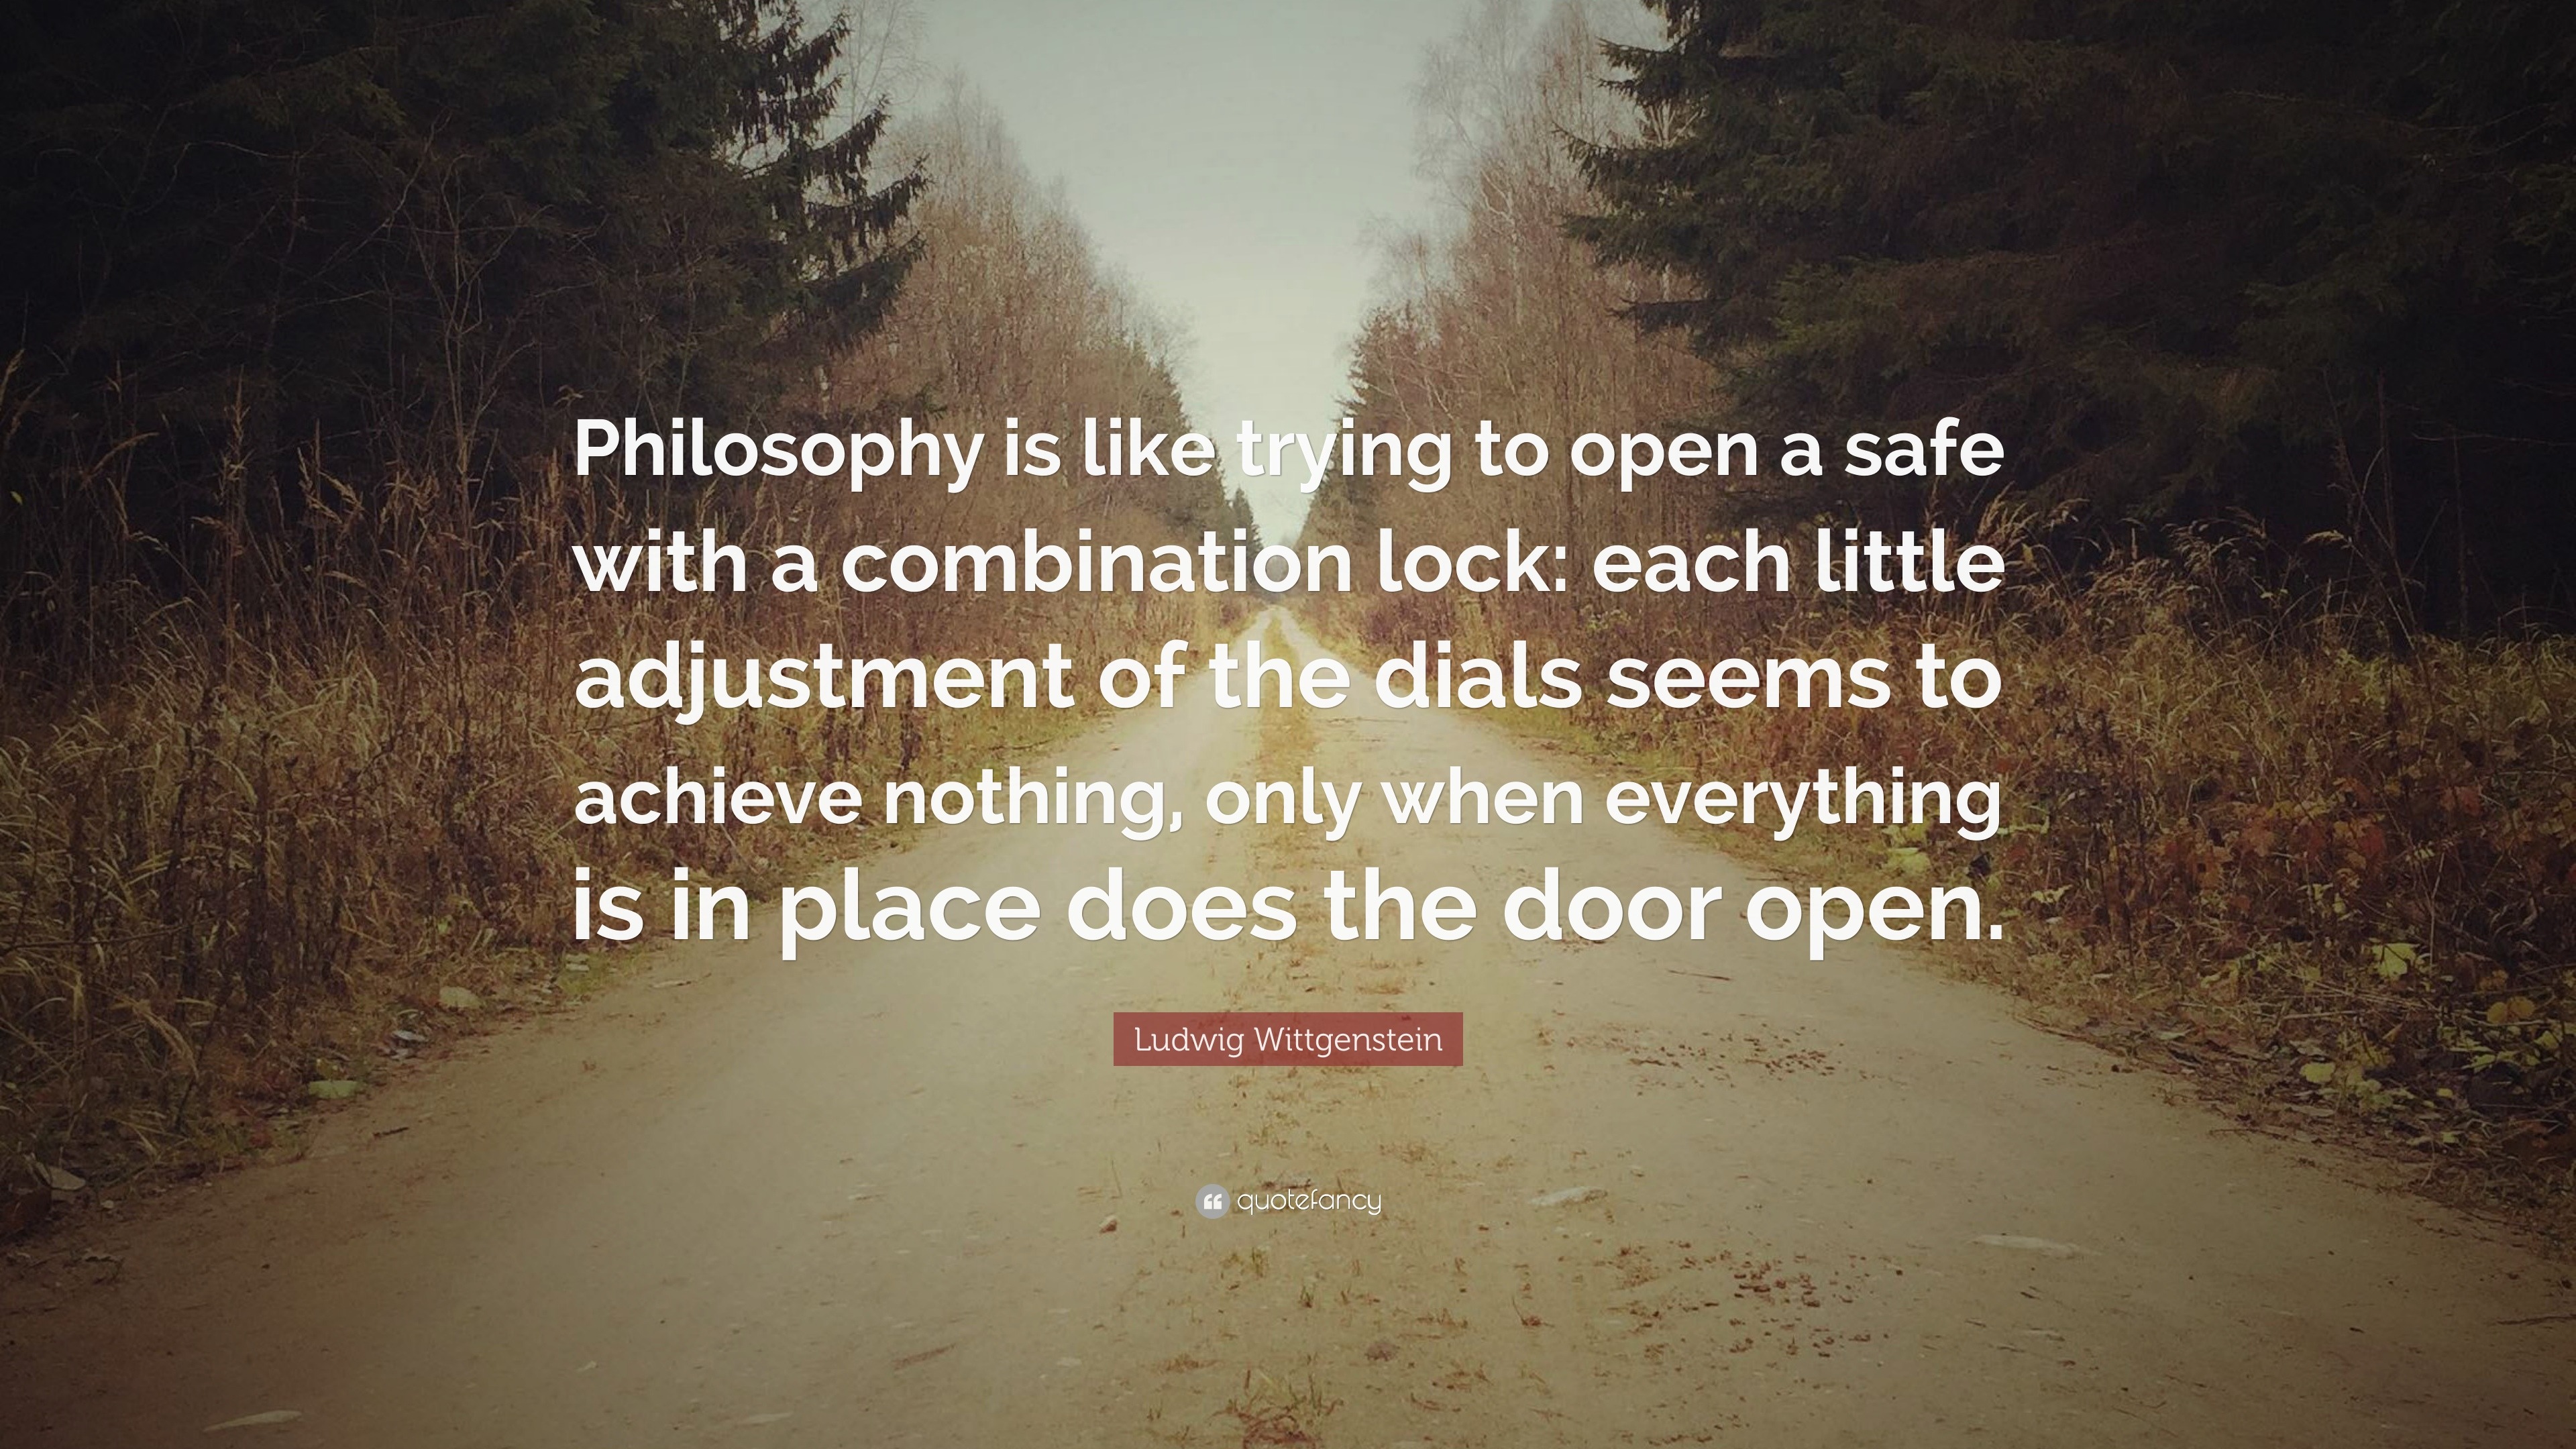 Ludwig Wittgenstein Quote: “Philosophy is like trying to open a safe with a  combination lock: each little adjustment of the dials seems to achieve n”